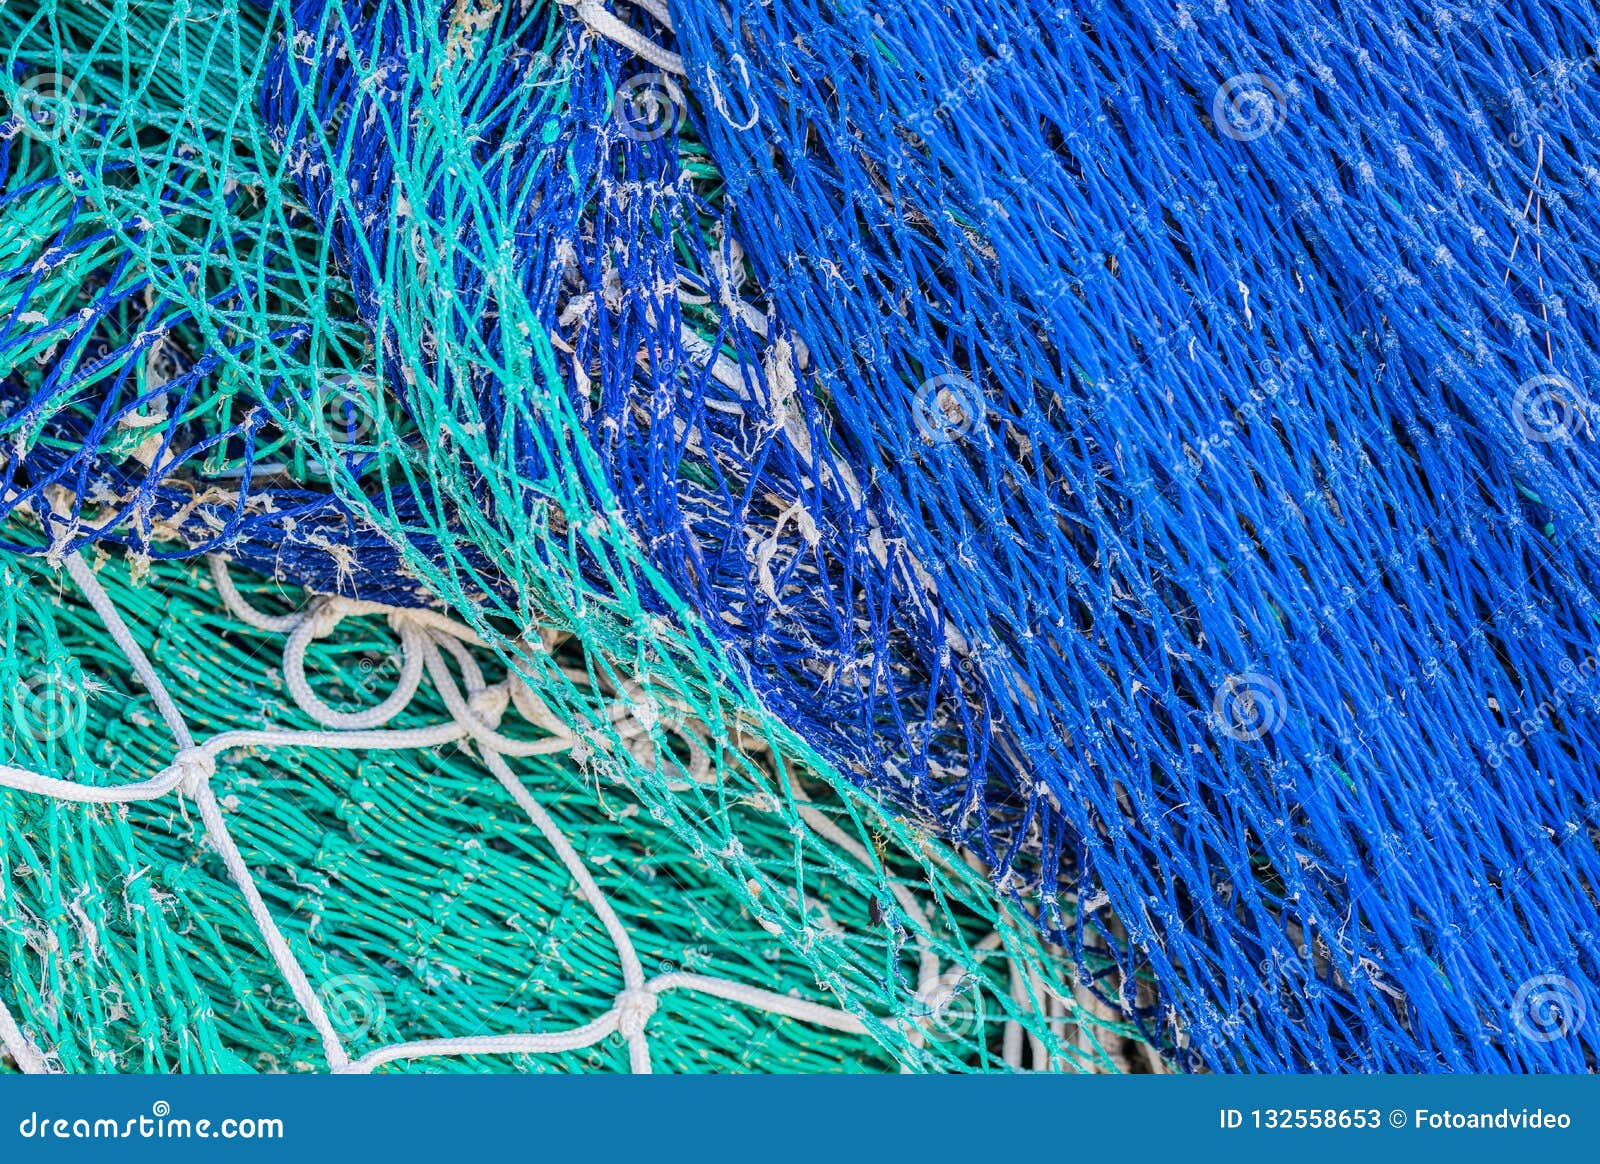 Pile of Green and Blue Fishing Net at Harbor, Close-up Stock Image - Image  of backgrounds, fish: 132558653